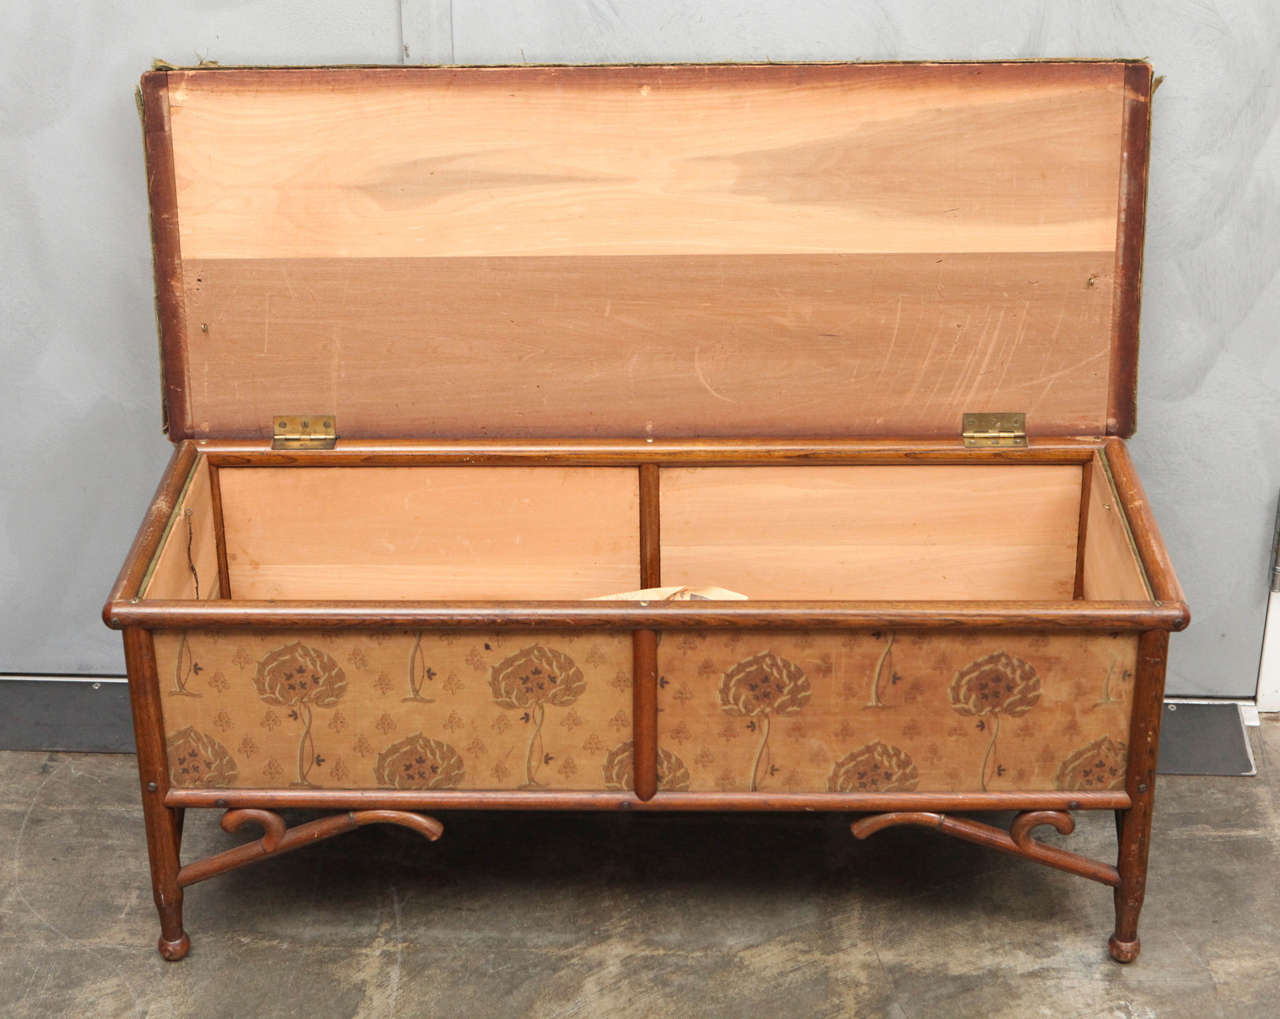 Fabric Arts and Crafts Upholstered Bentwood Bench or Trunk